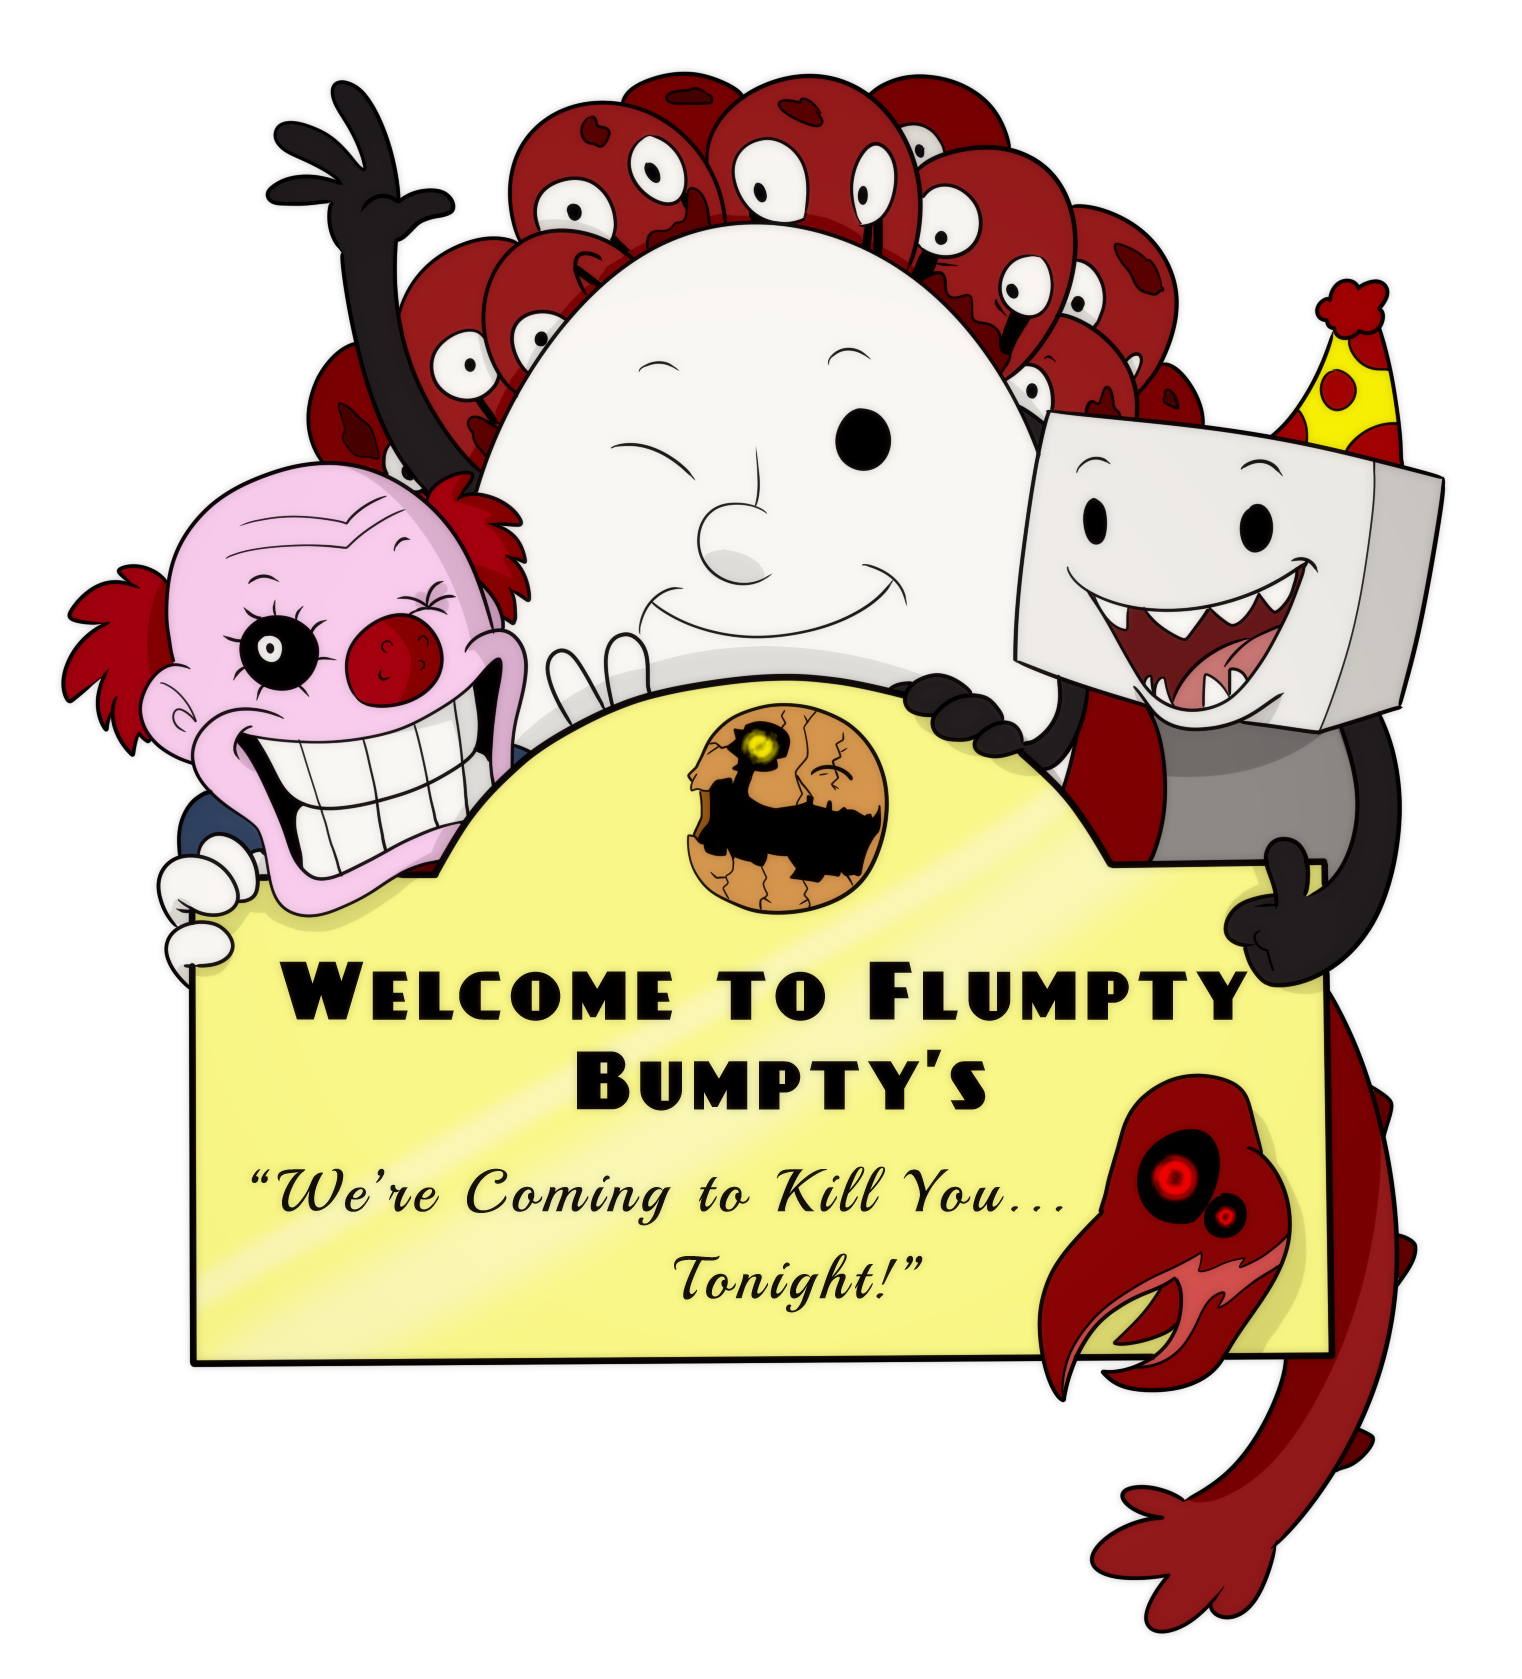 One Night at Flumpty's 2/Gallery, One Night at Flumpty's Wiki